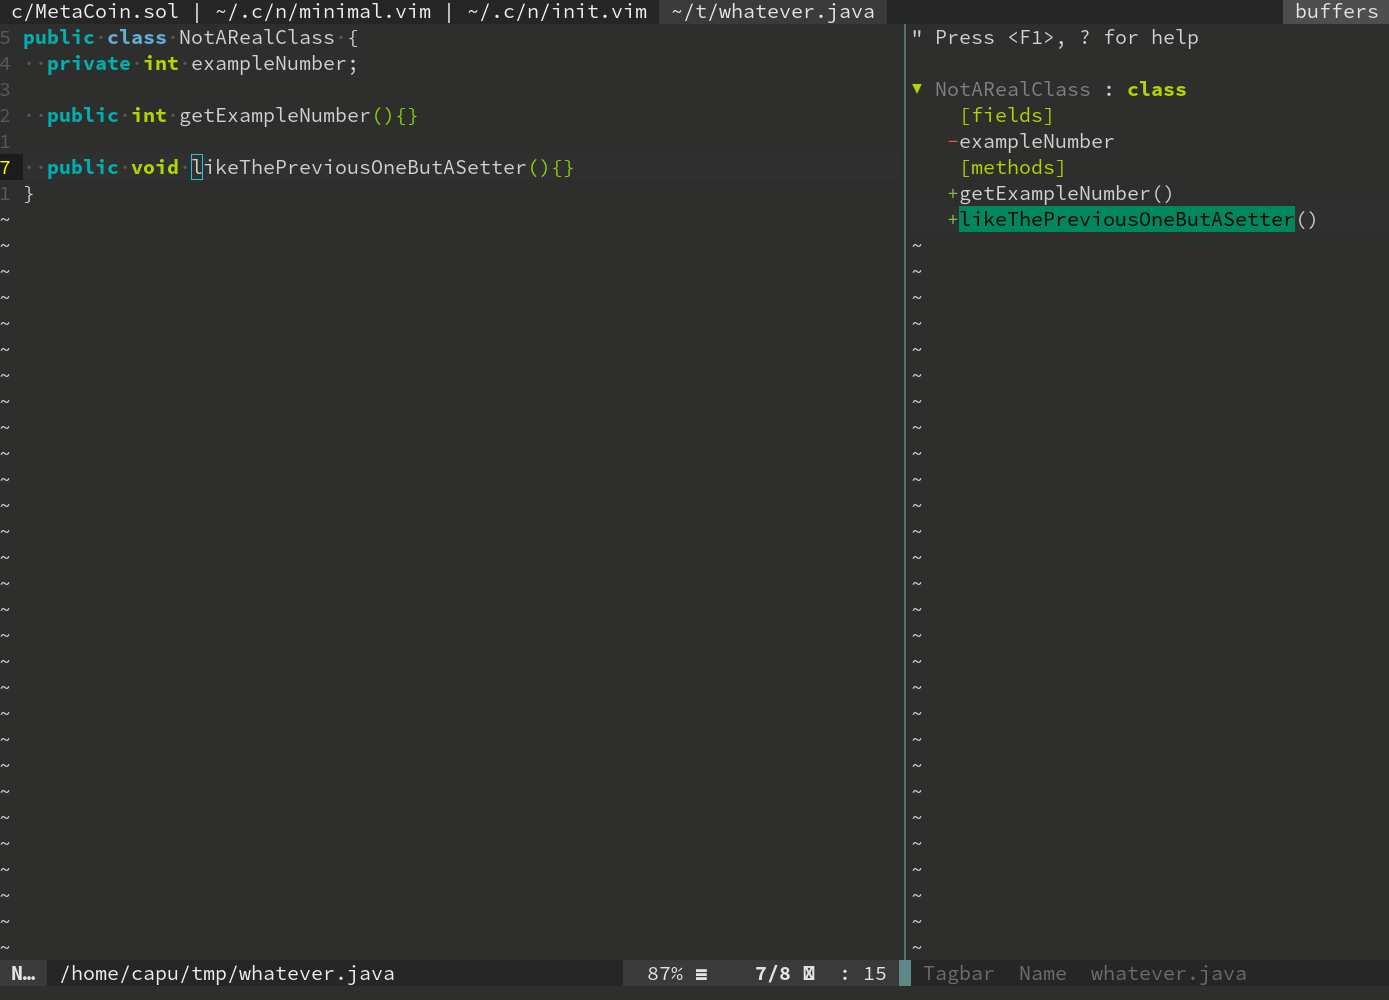 a screenshot of vim with tagbar open and working on an example Java class